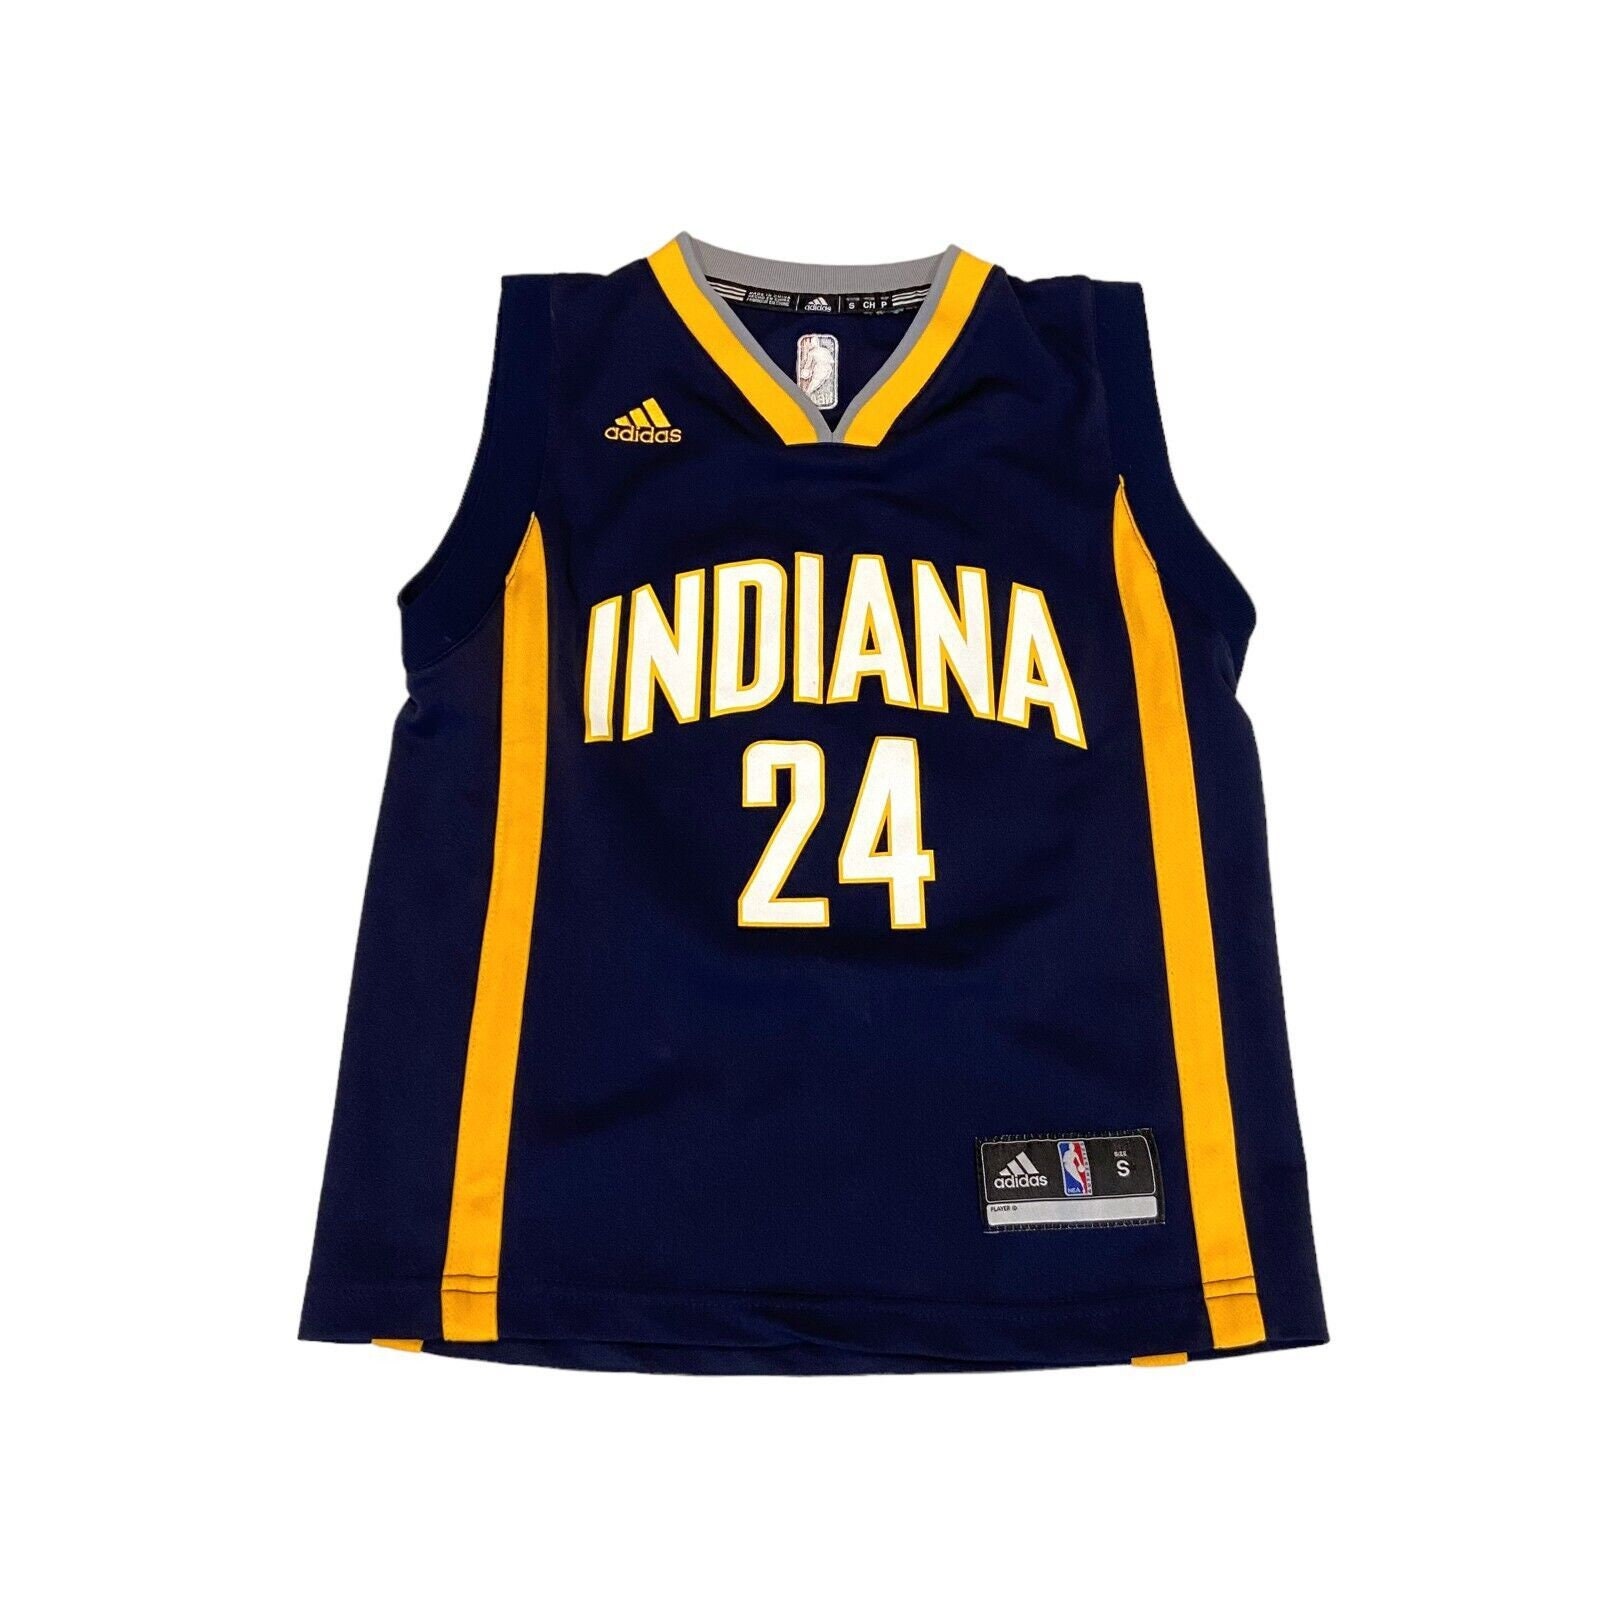 NBA Indiana Pacers Paul George 13 adidas Navy Blue Jersey Youth M